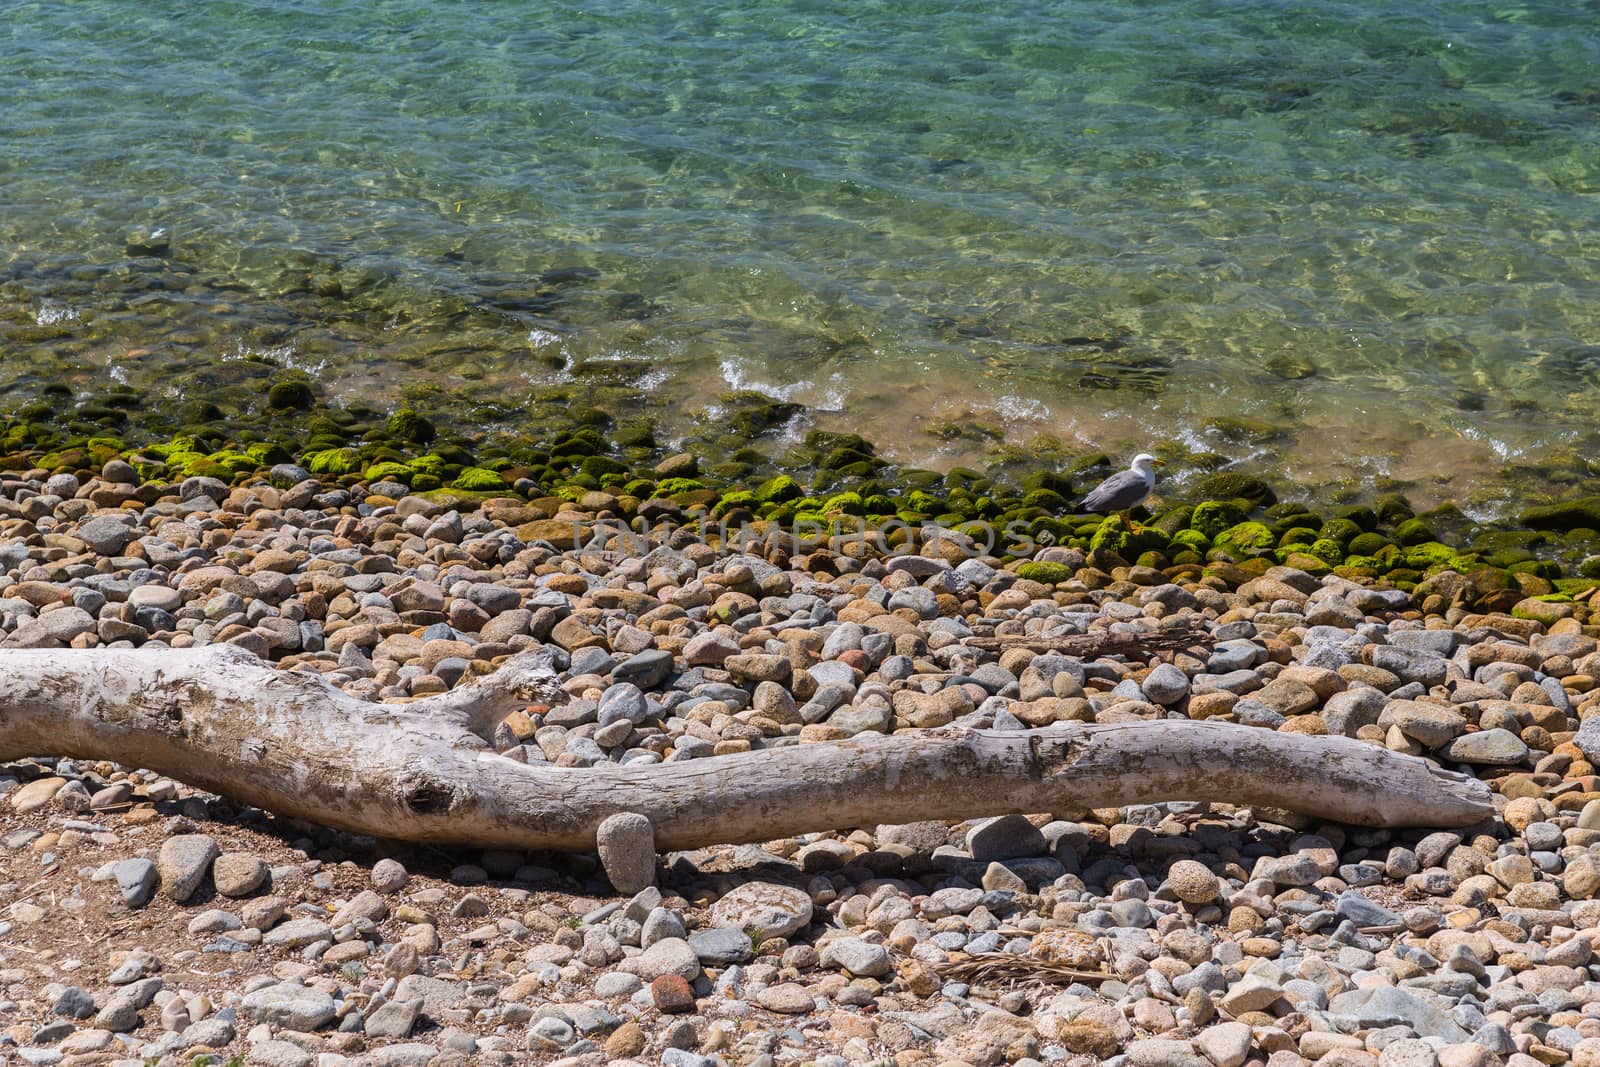 Driftwood washed up on the shore by the coast in Ajaccio by chrisukphoto